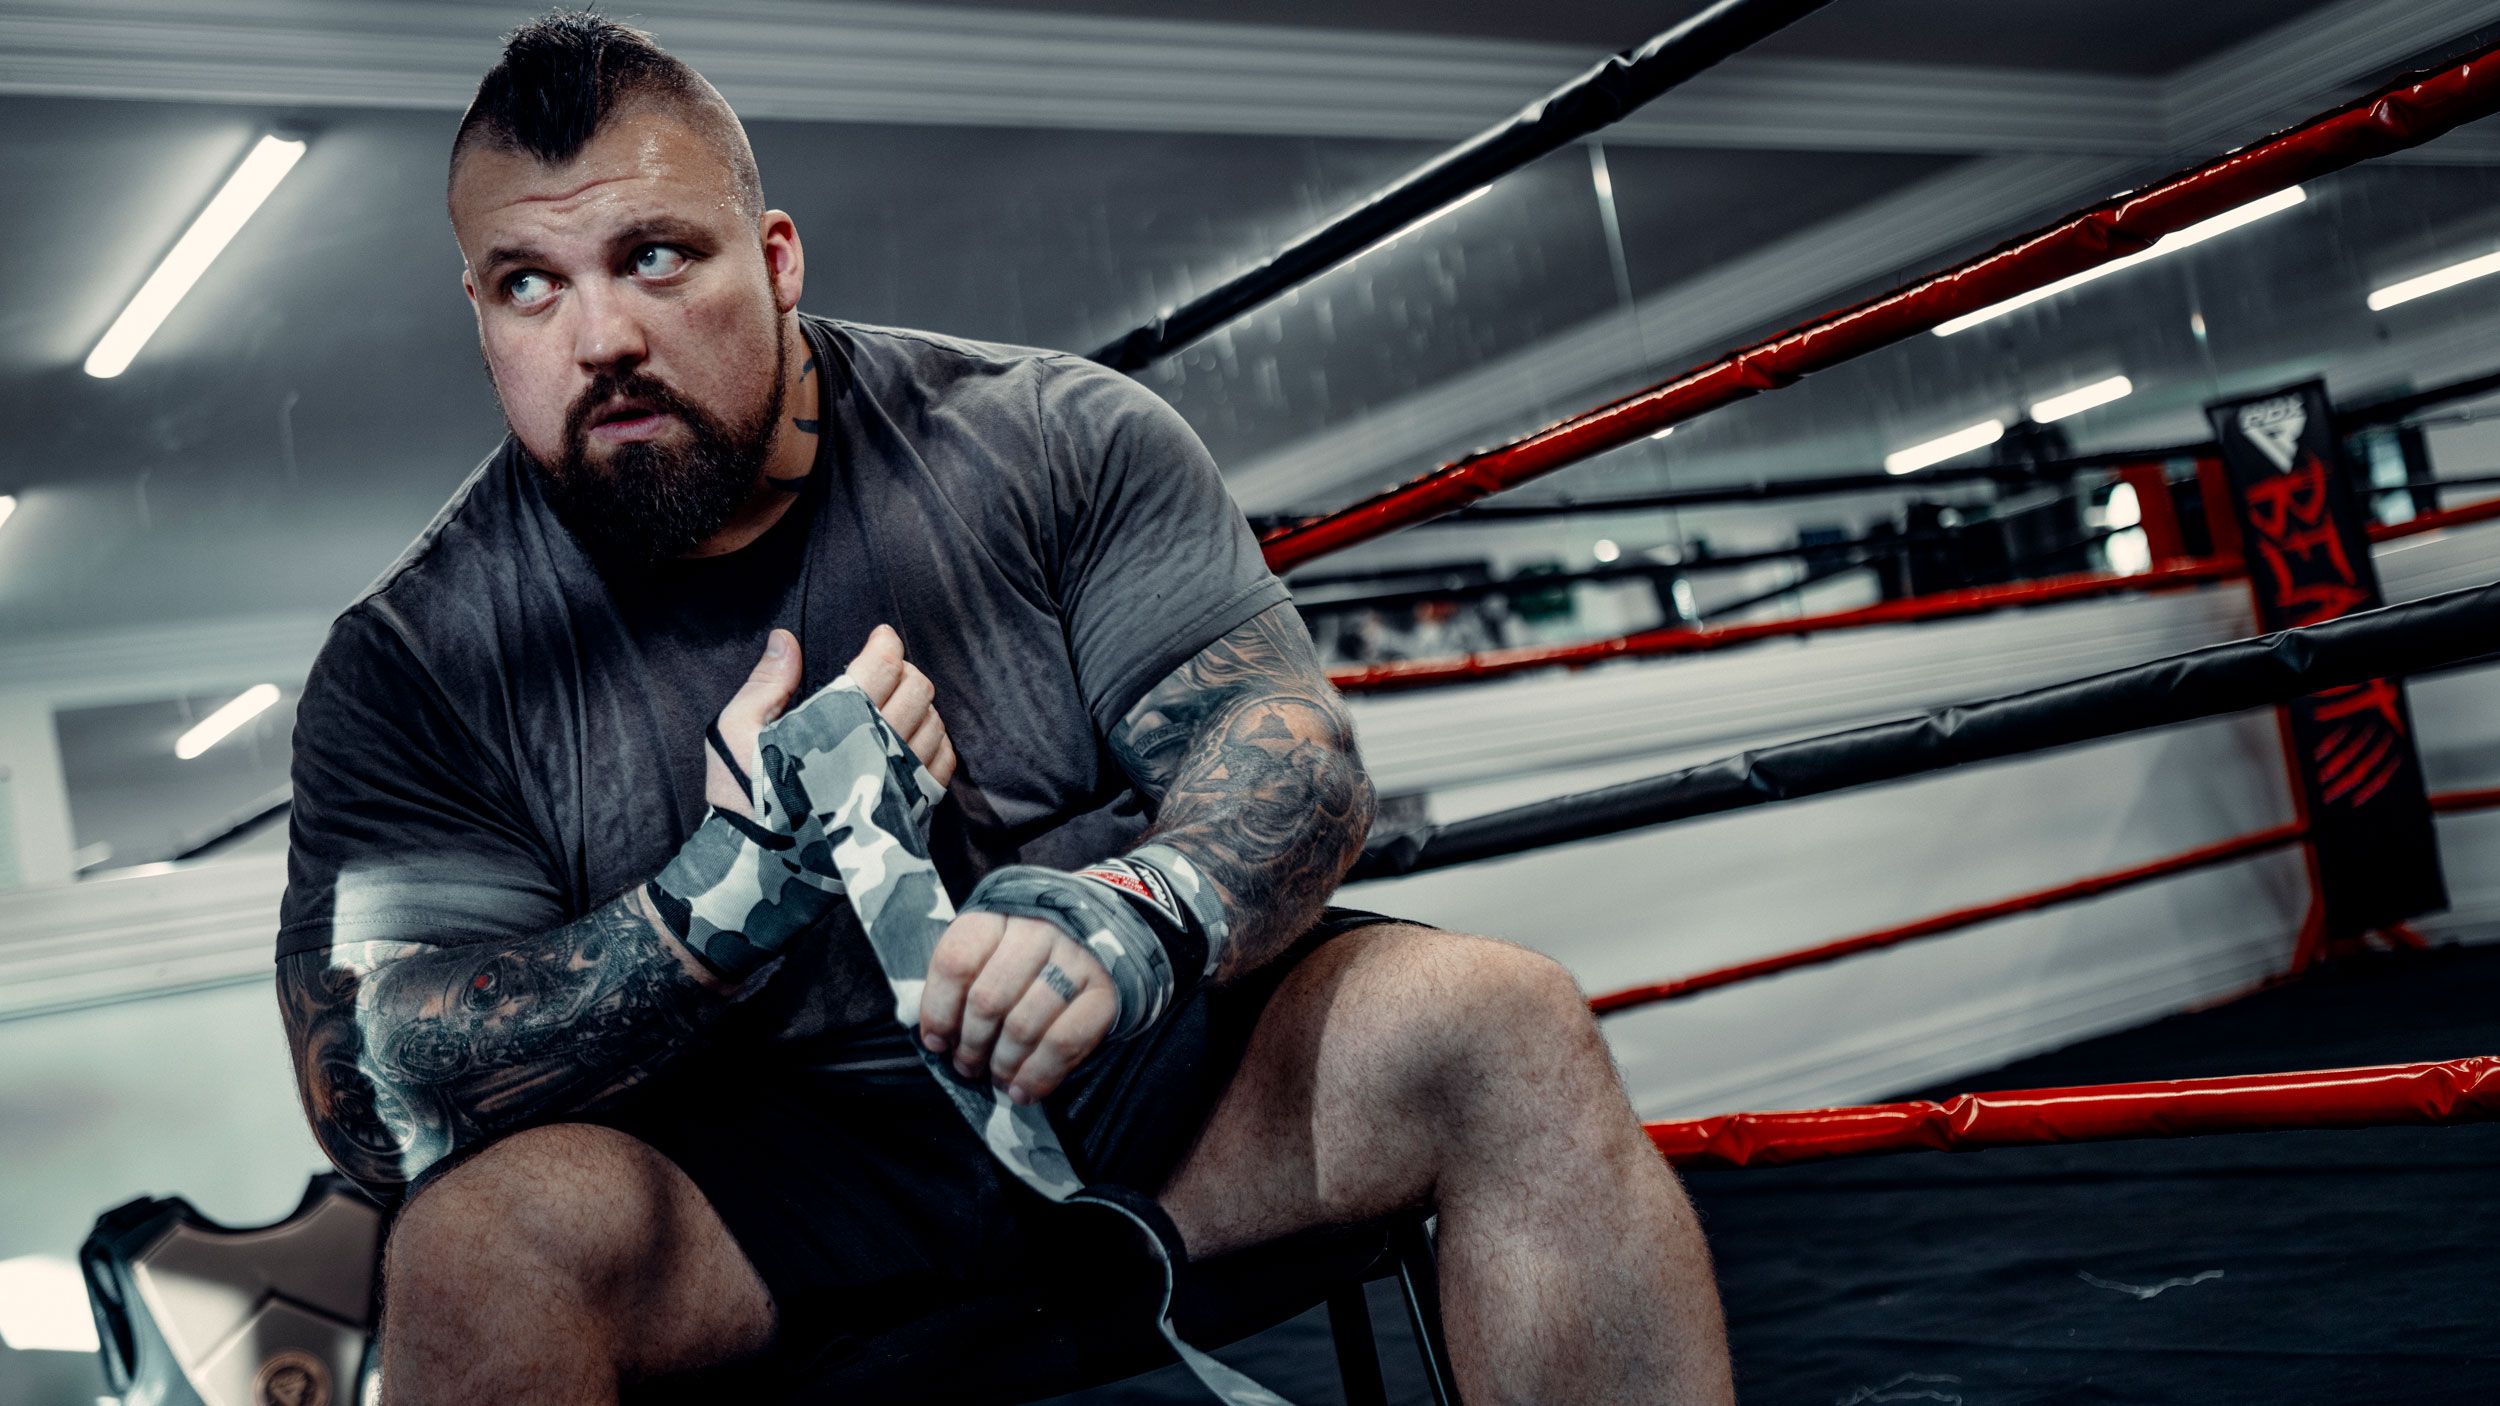 Eddie Hall on the Worlds Strongest Fight Fallout